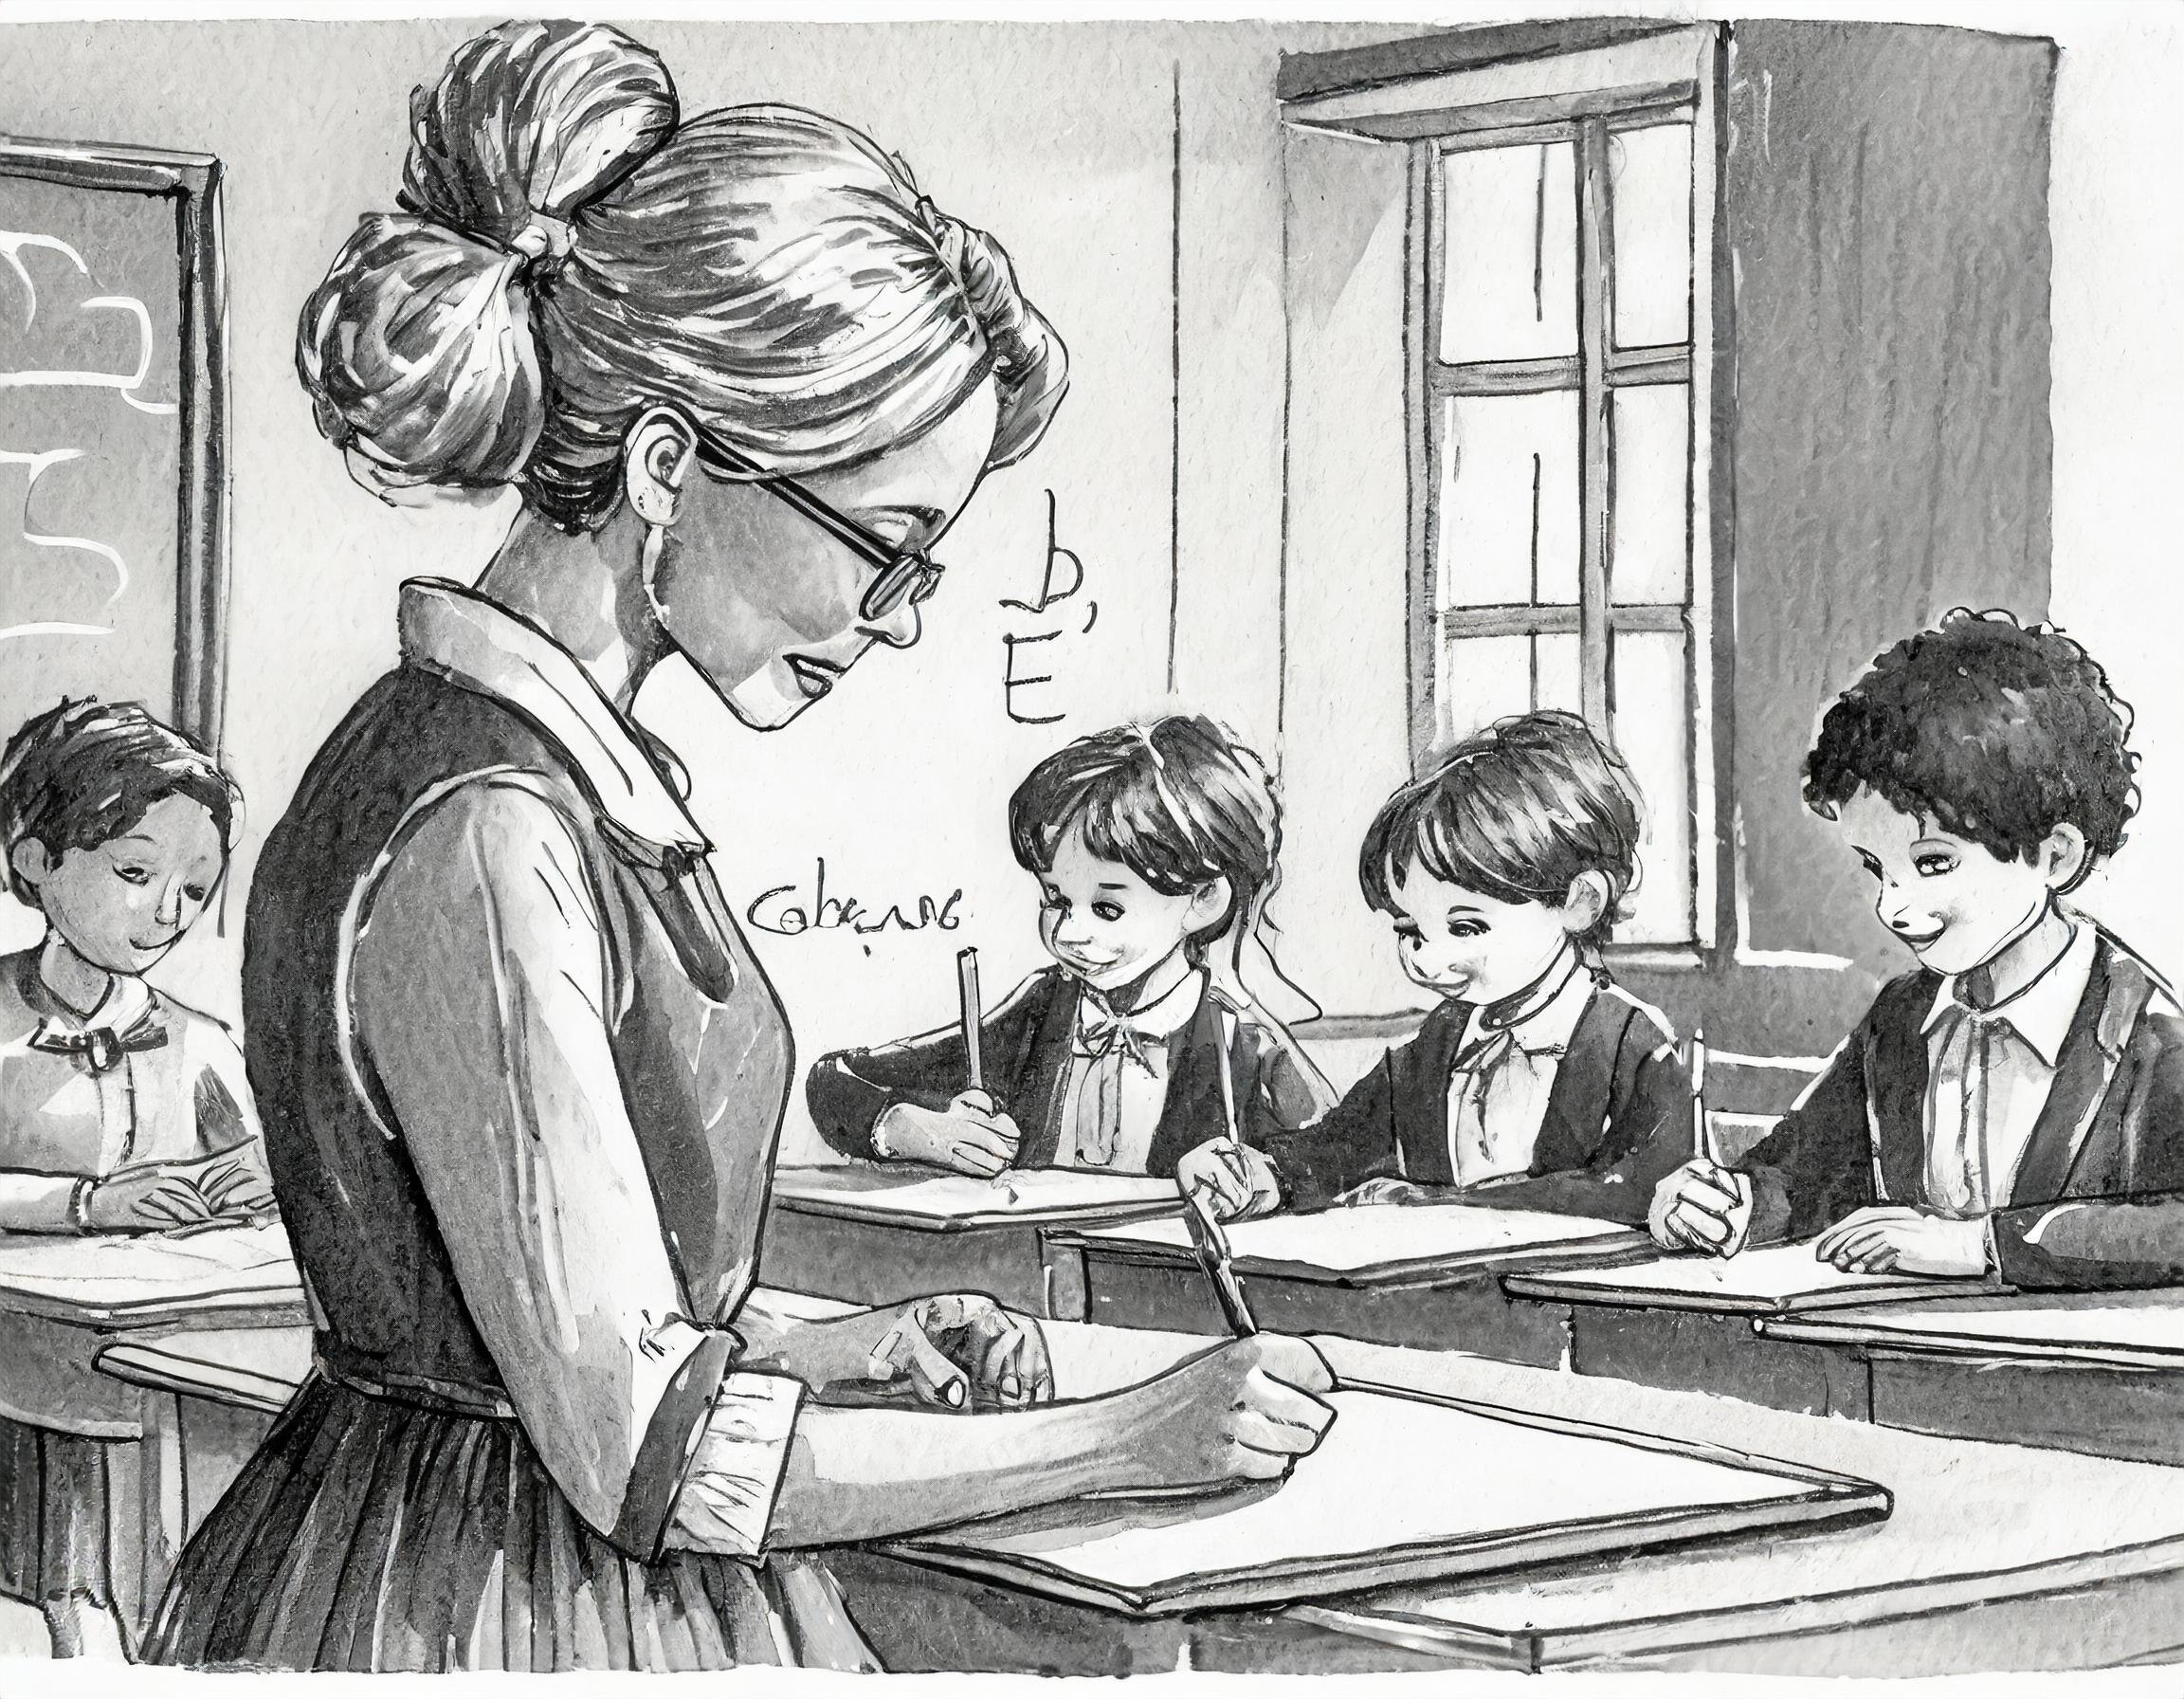 Sketch in black and white, late 1930s, a teacher standing at the blackboard a school class in a classroom, pupils writing individual letters on a small slate, a teacher standing at the blackboard in front of the pupils